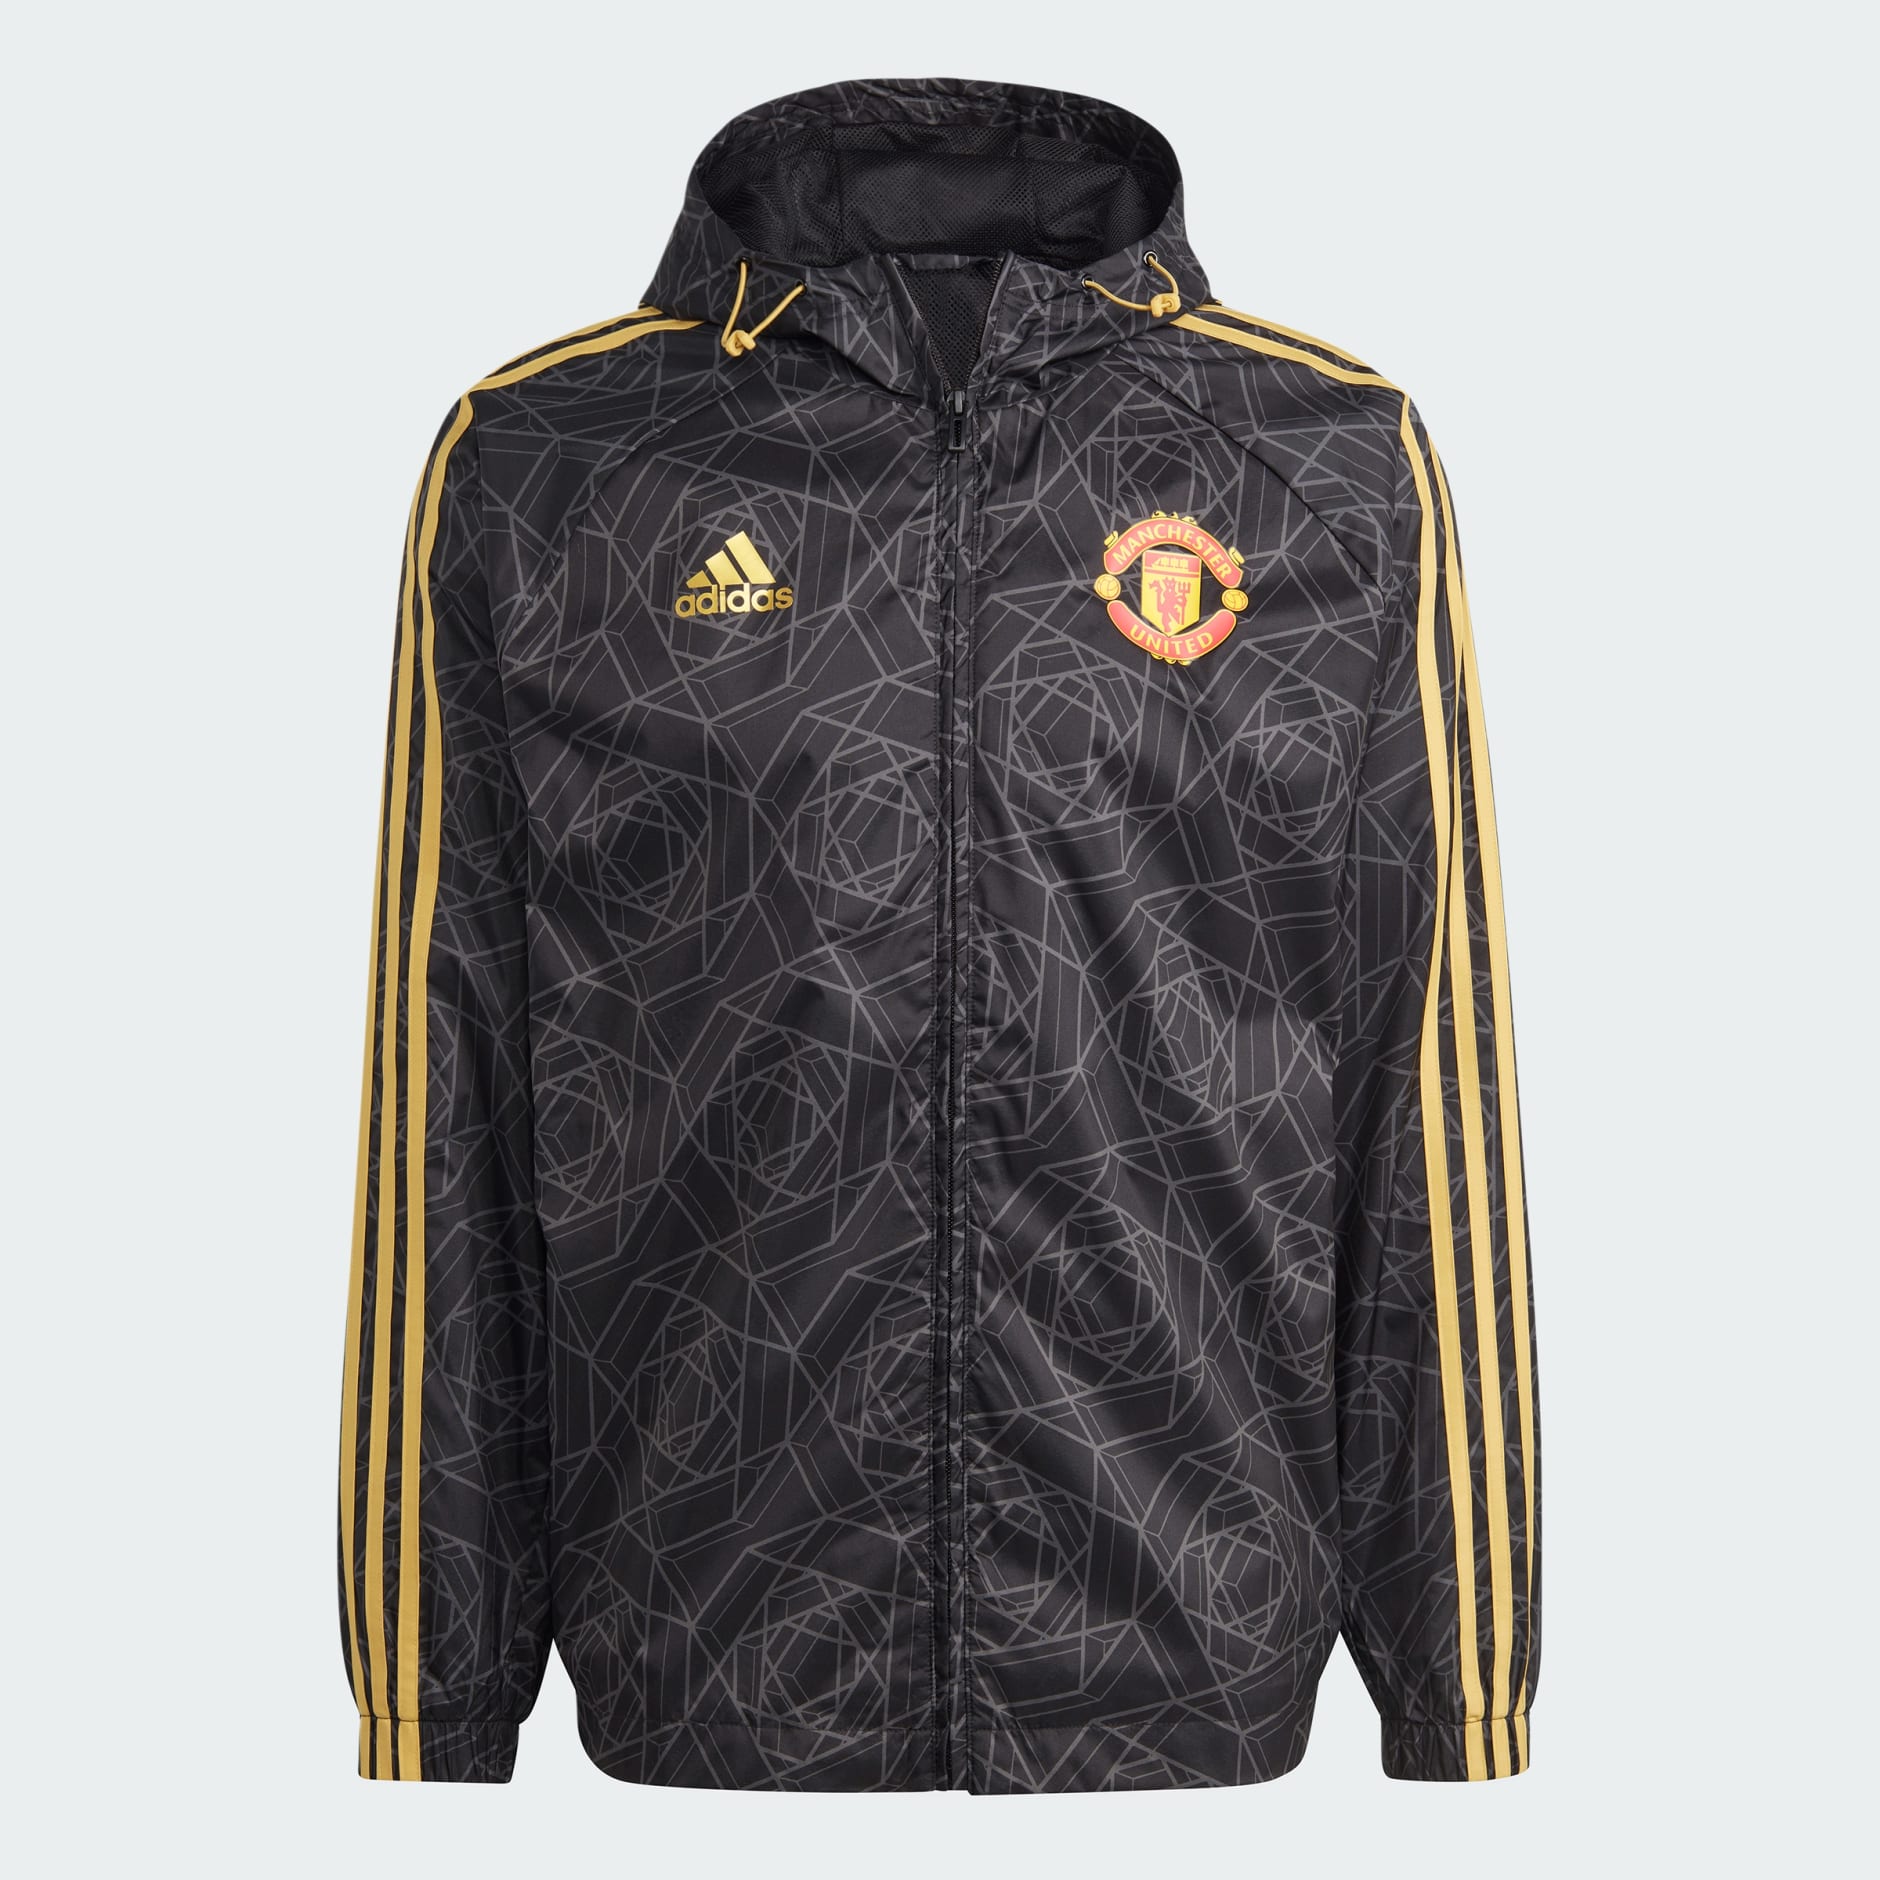 Clothing - Manchester United DNA Windbreaker - Black | adidas South Africa